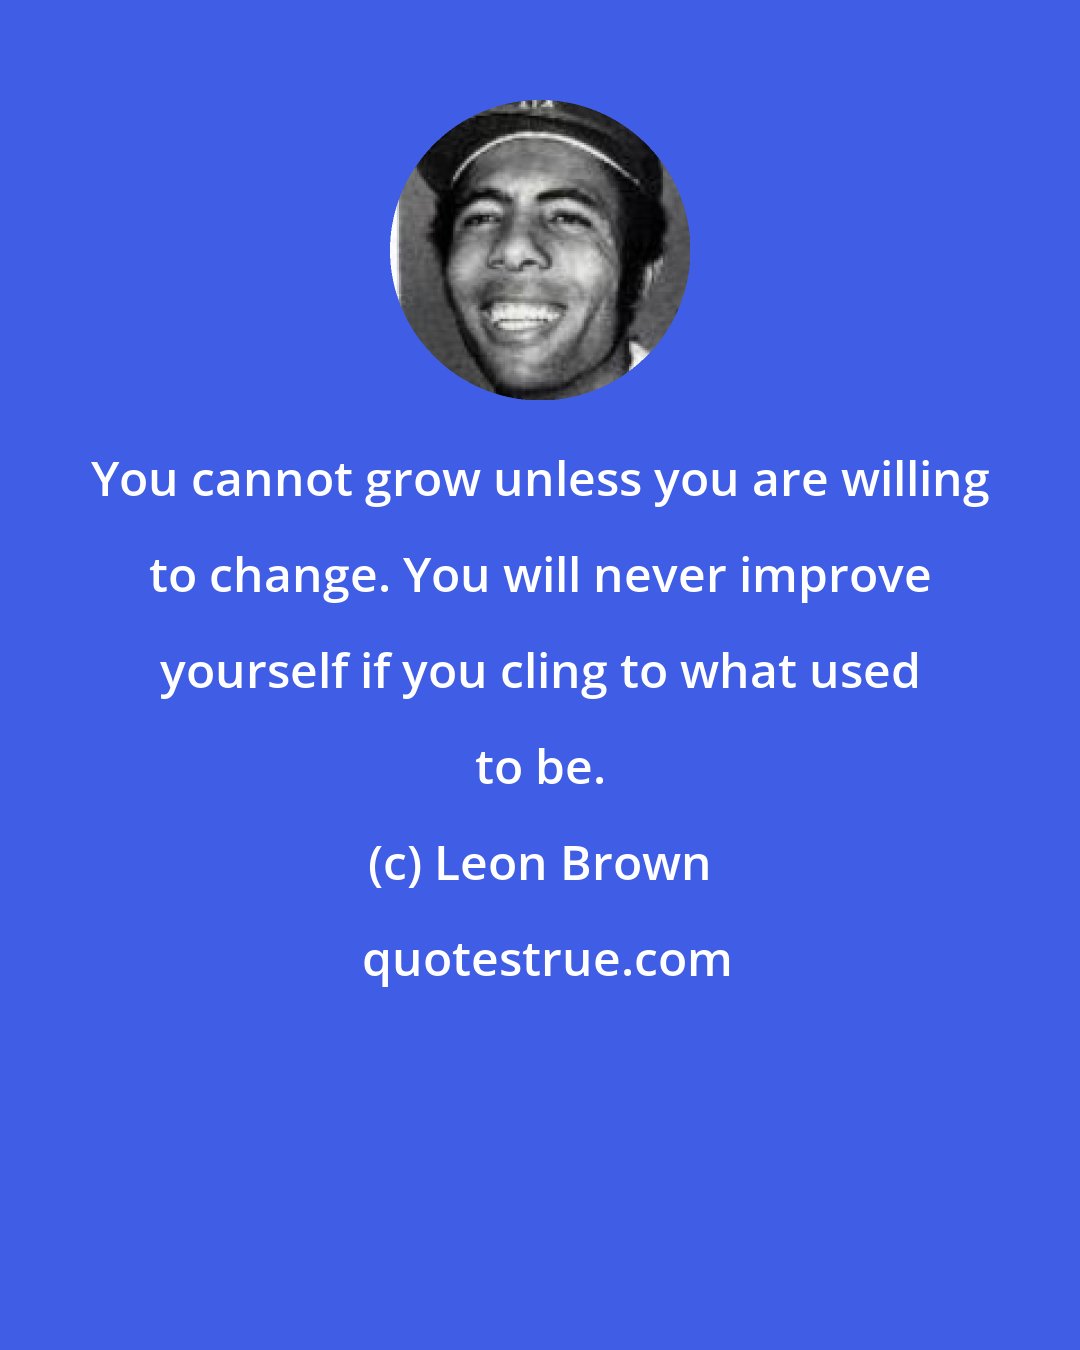 Leon Brown: You cannot grow unless you are willing to change. You will never improve yourself if you cling to what used to be.